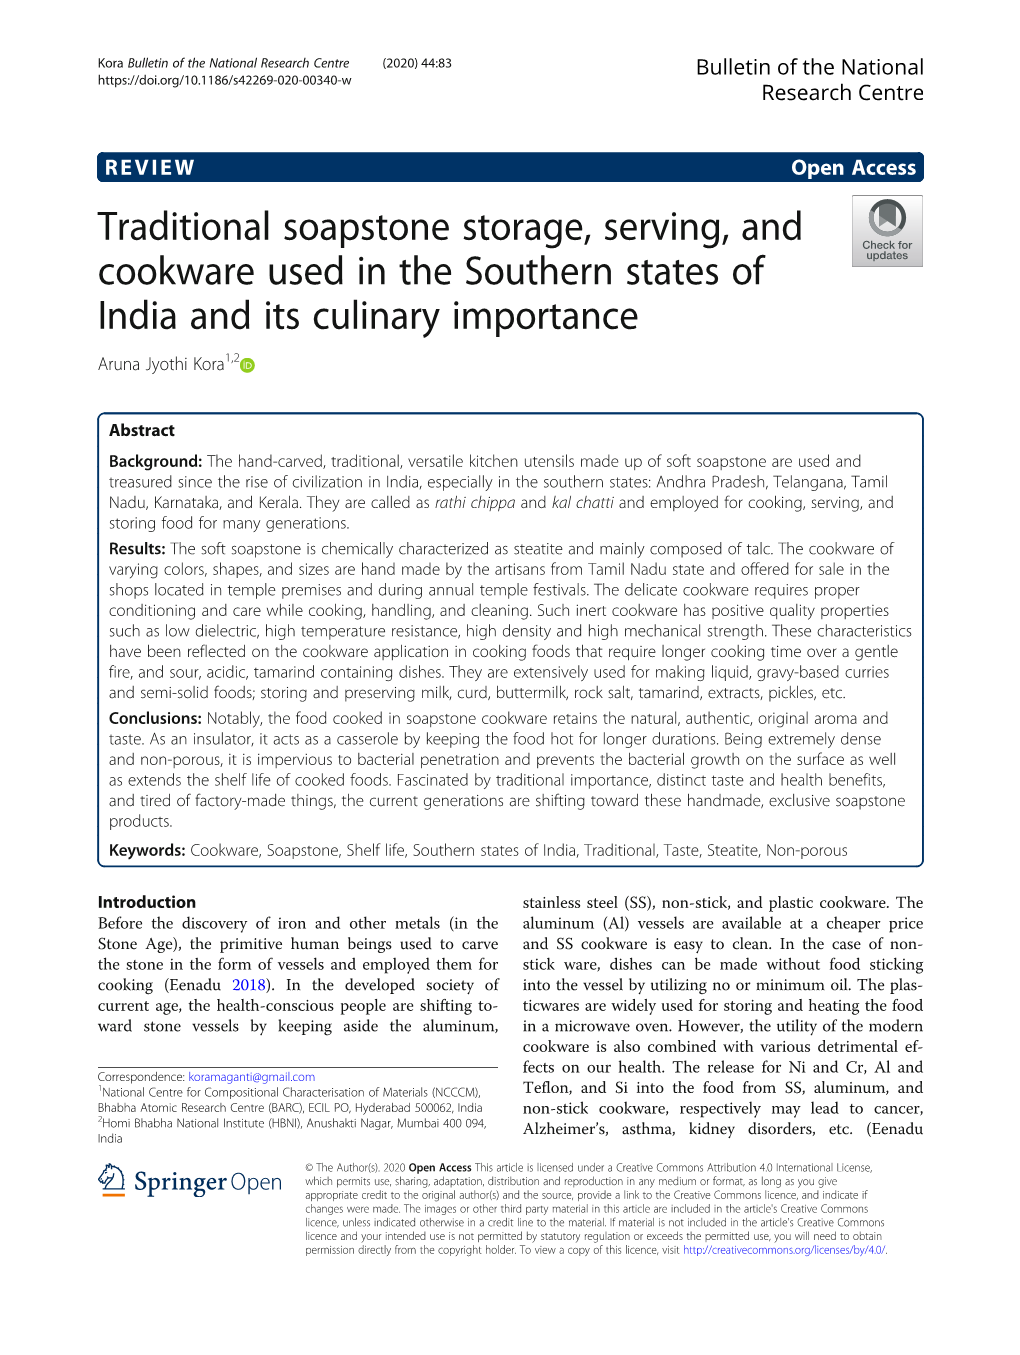 Traditional Soapstone Storage, Serving, and Cookware Used in the Southern States of India and Its Culinary Importance Aruna Jyothi Kora1,2